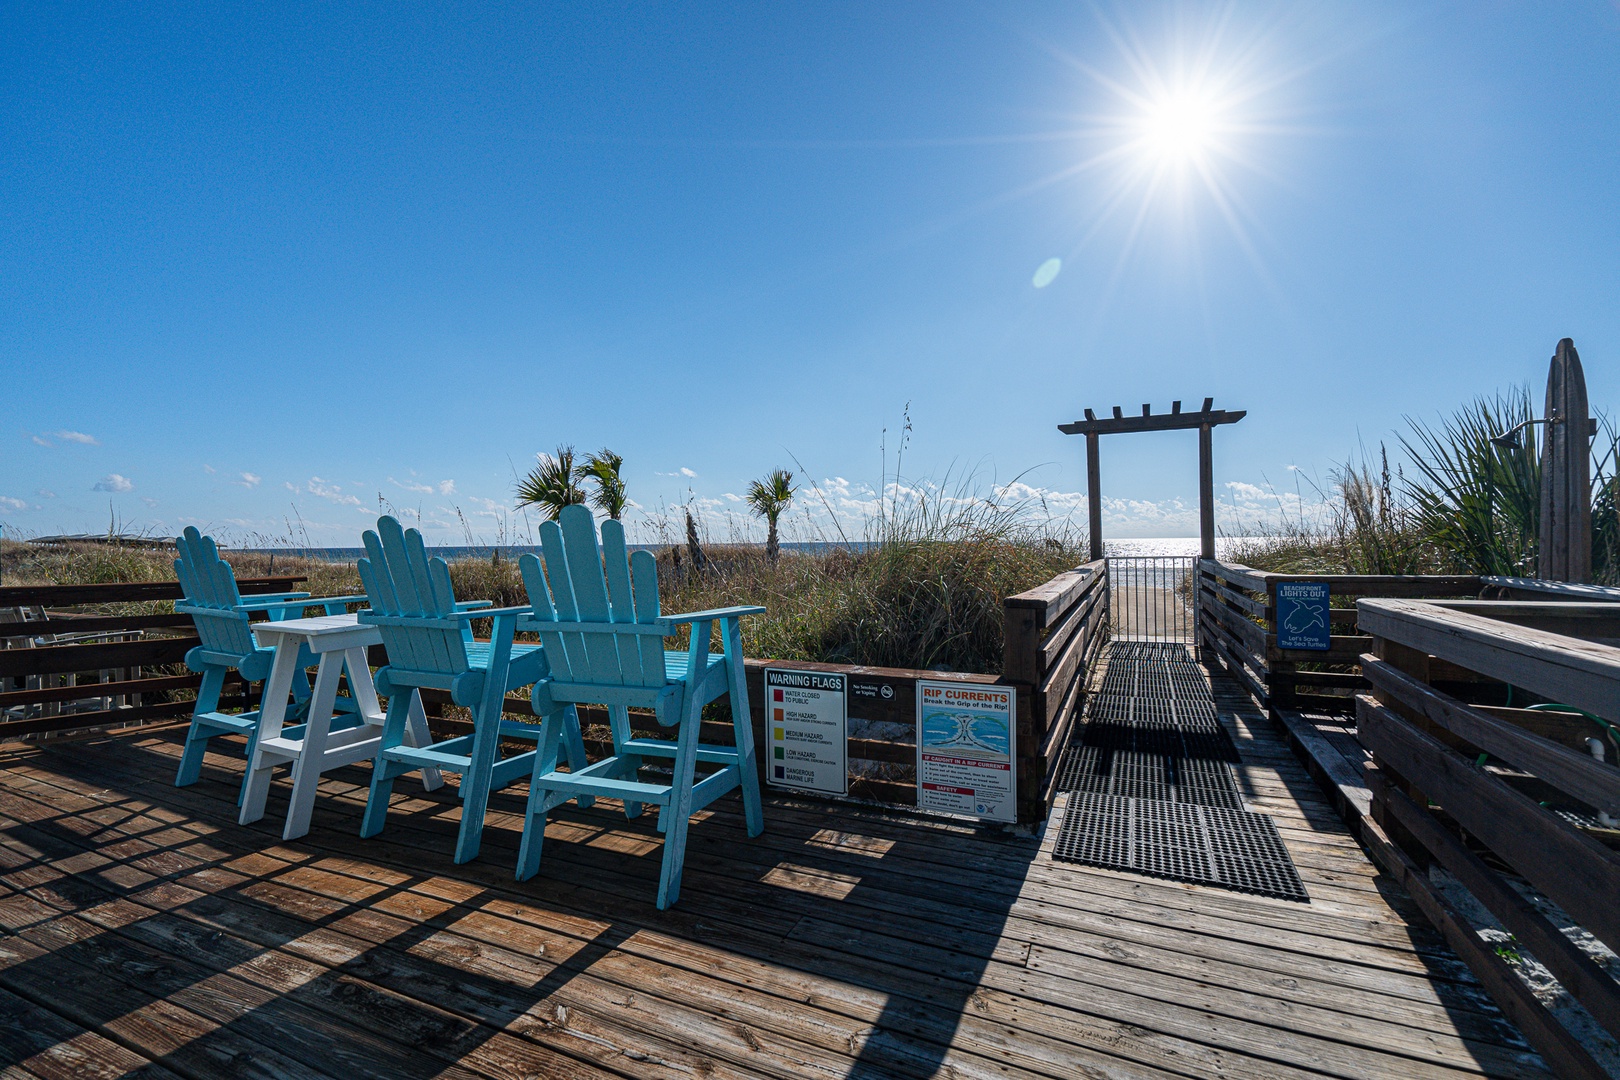 Seaside serenity awaits, just a short walk from your doorstep. #BeachfrontBliss